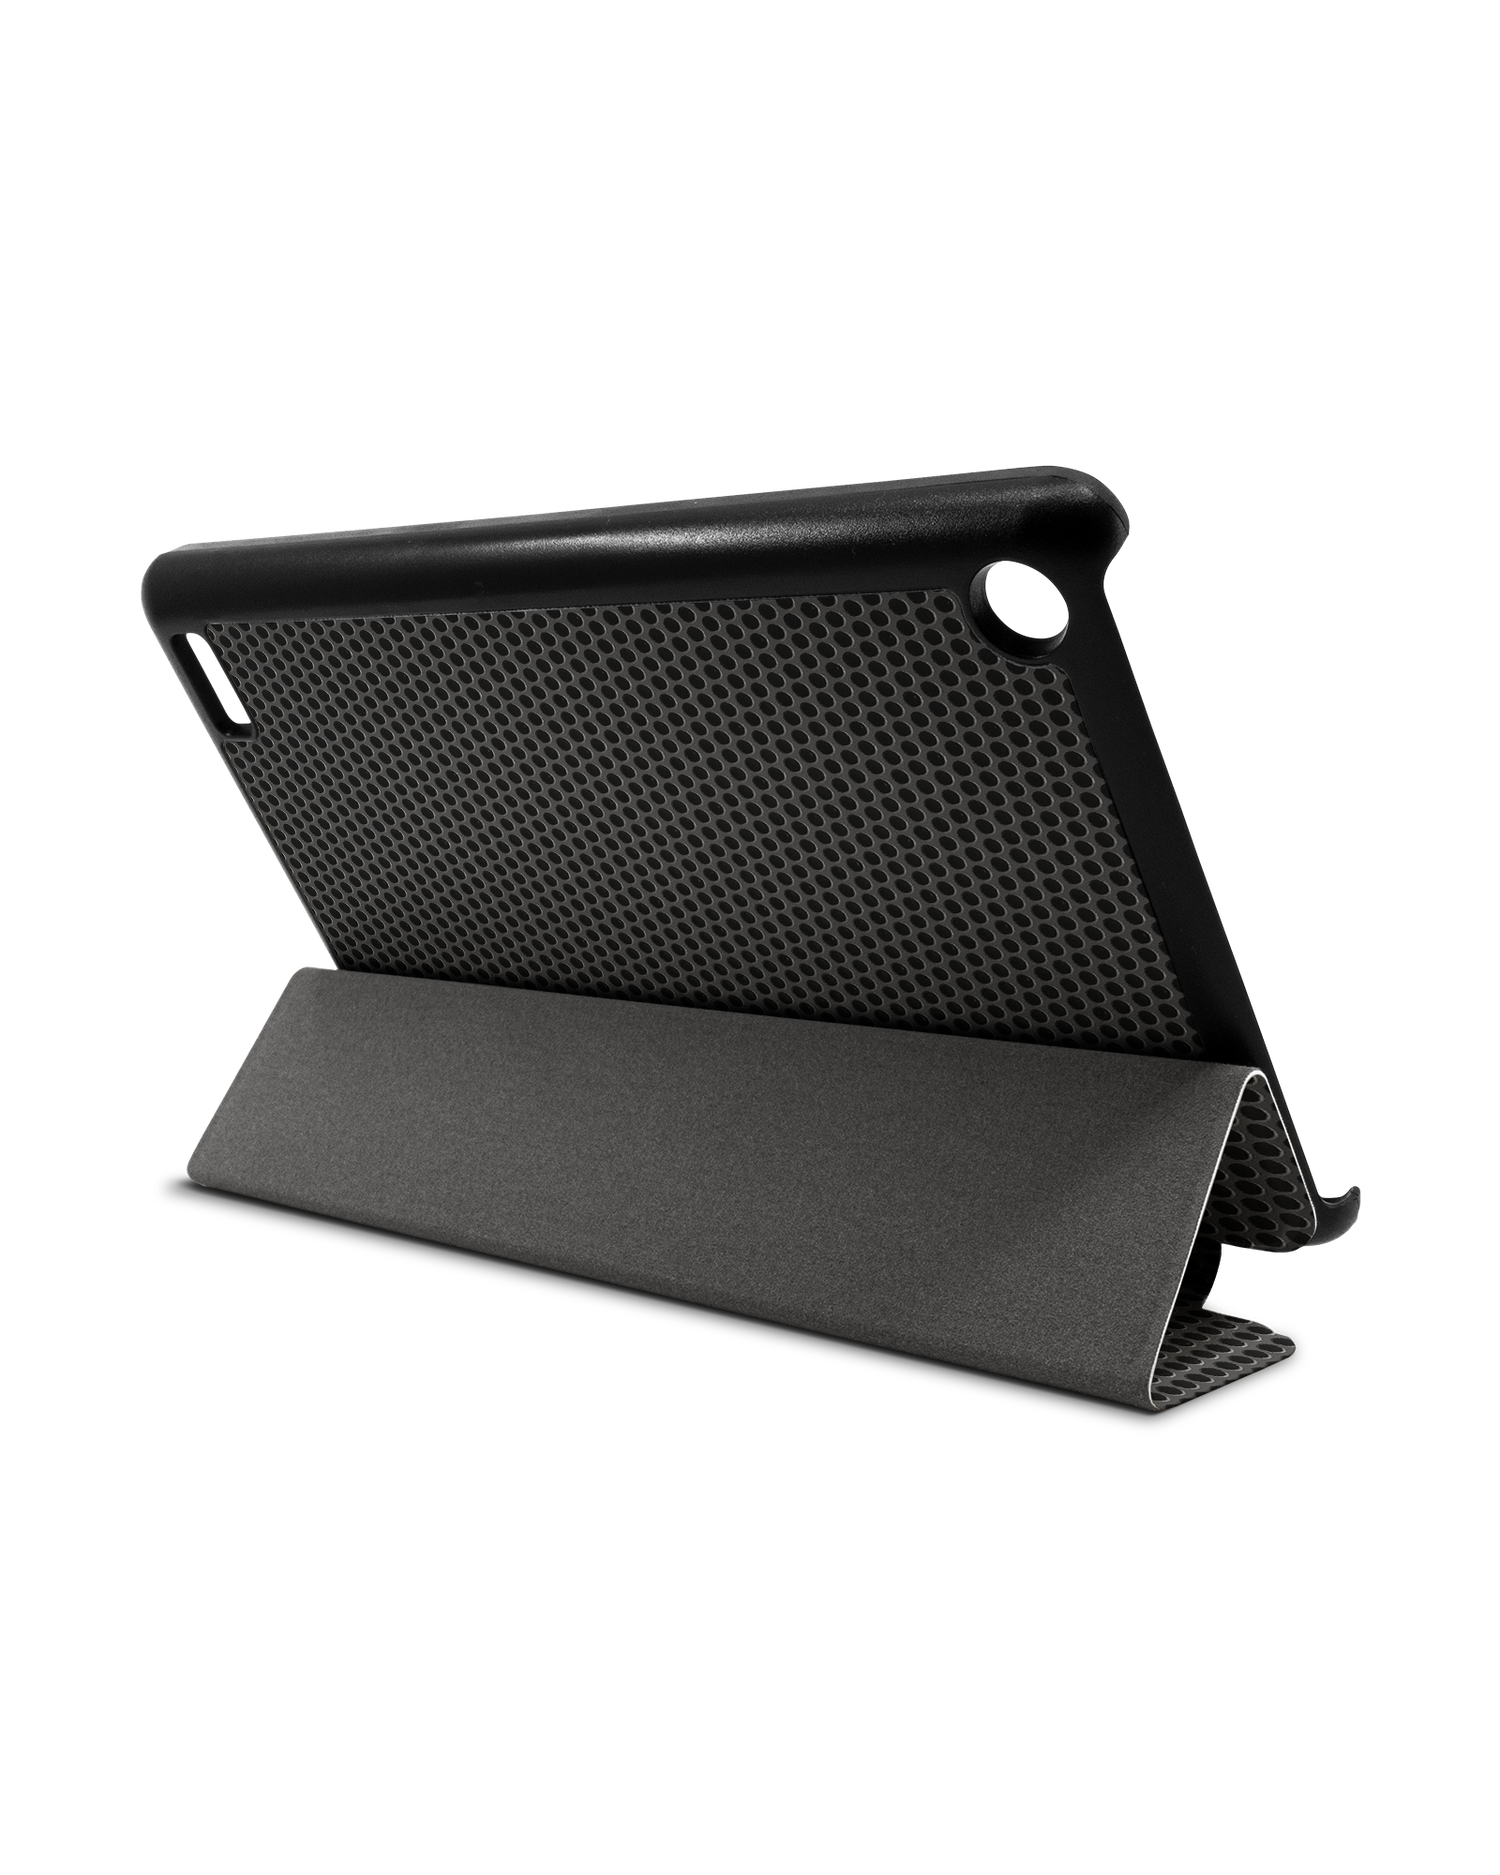 Carbon II Tablet Smart Case for Amazon Fire 7: Used as Stand